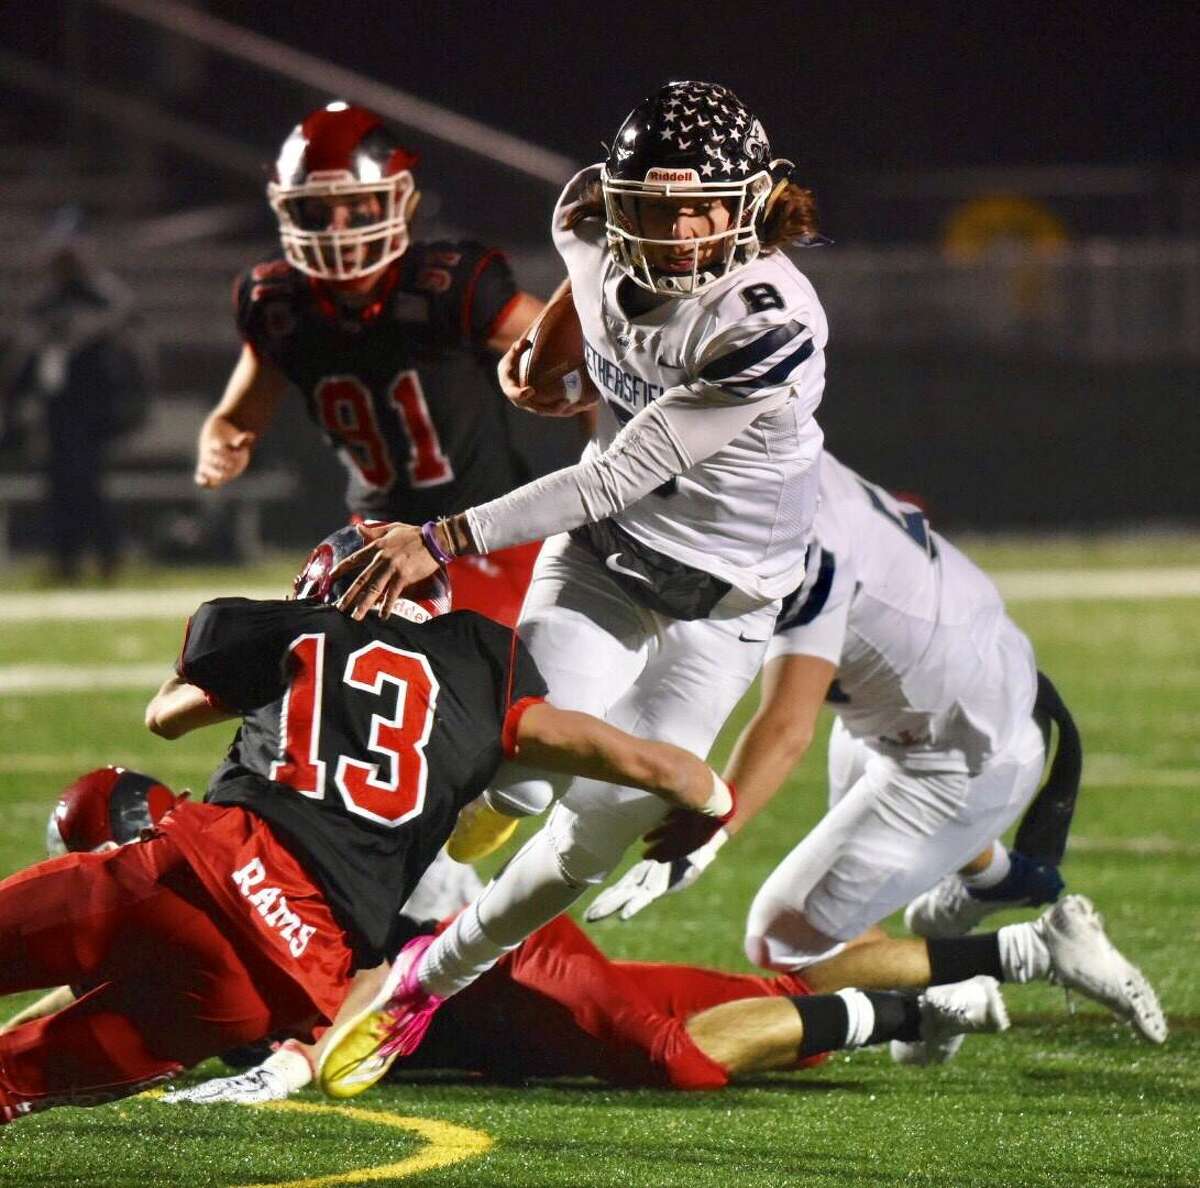 Wethersfield QB Matt Silver (8) runs with the ball while New Canaan’s Walker Swindell (13) goes for a tackle during the Class L football quarterfinals at Dunning Field on Wednesday, Dec. 4, 2019.